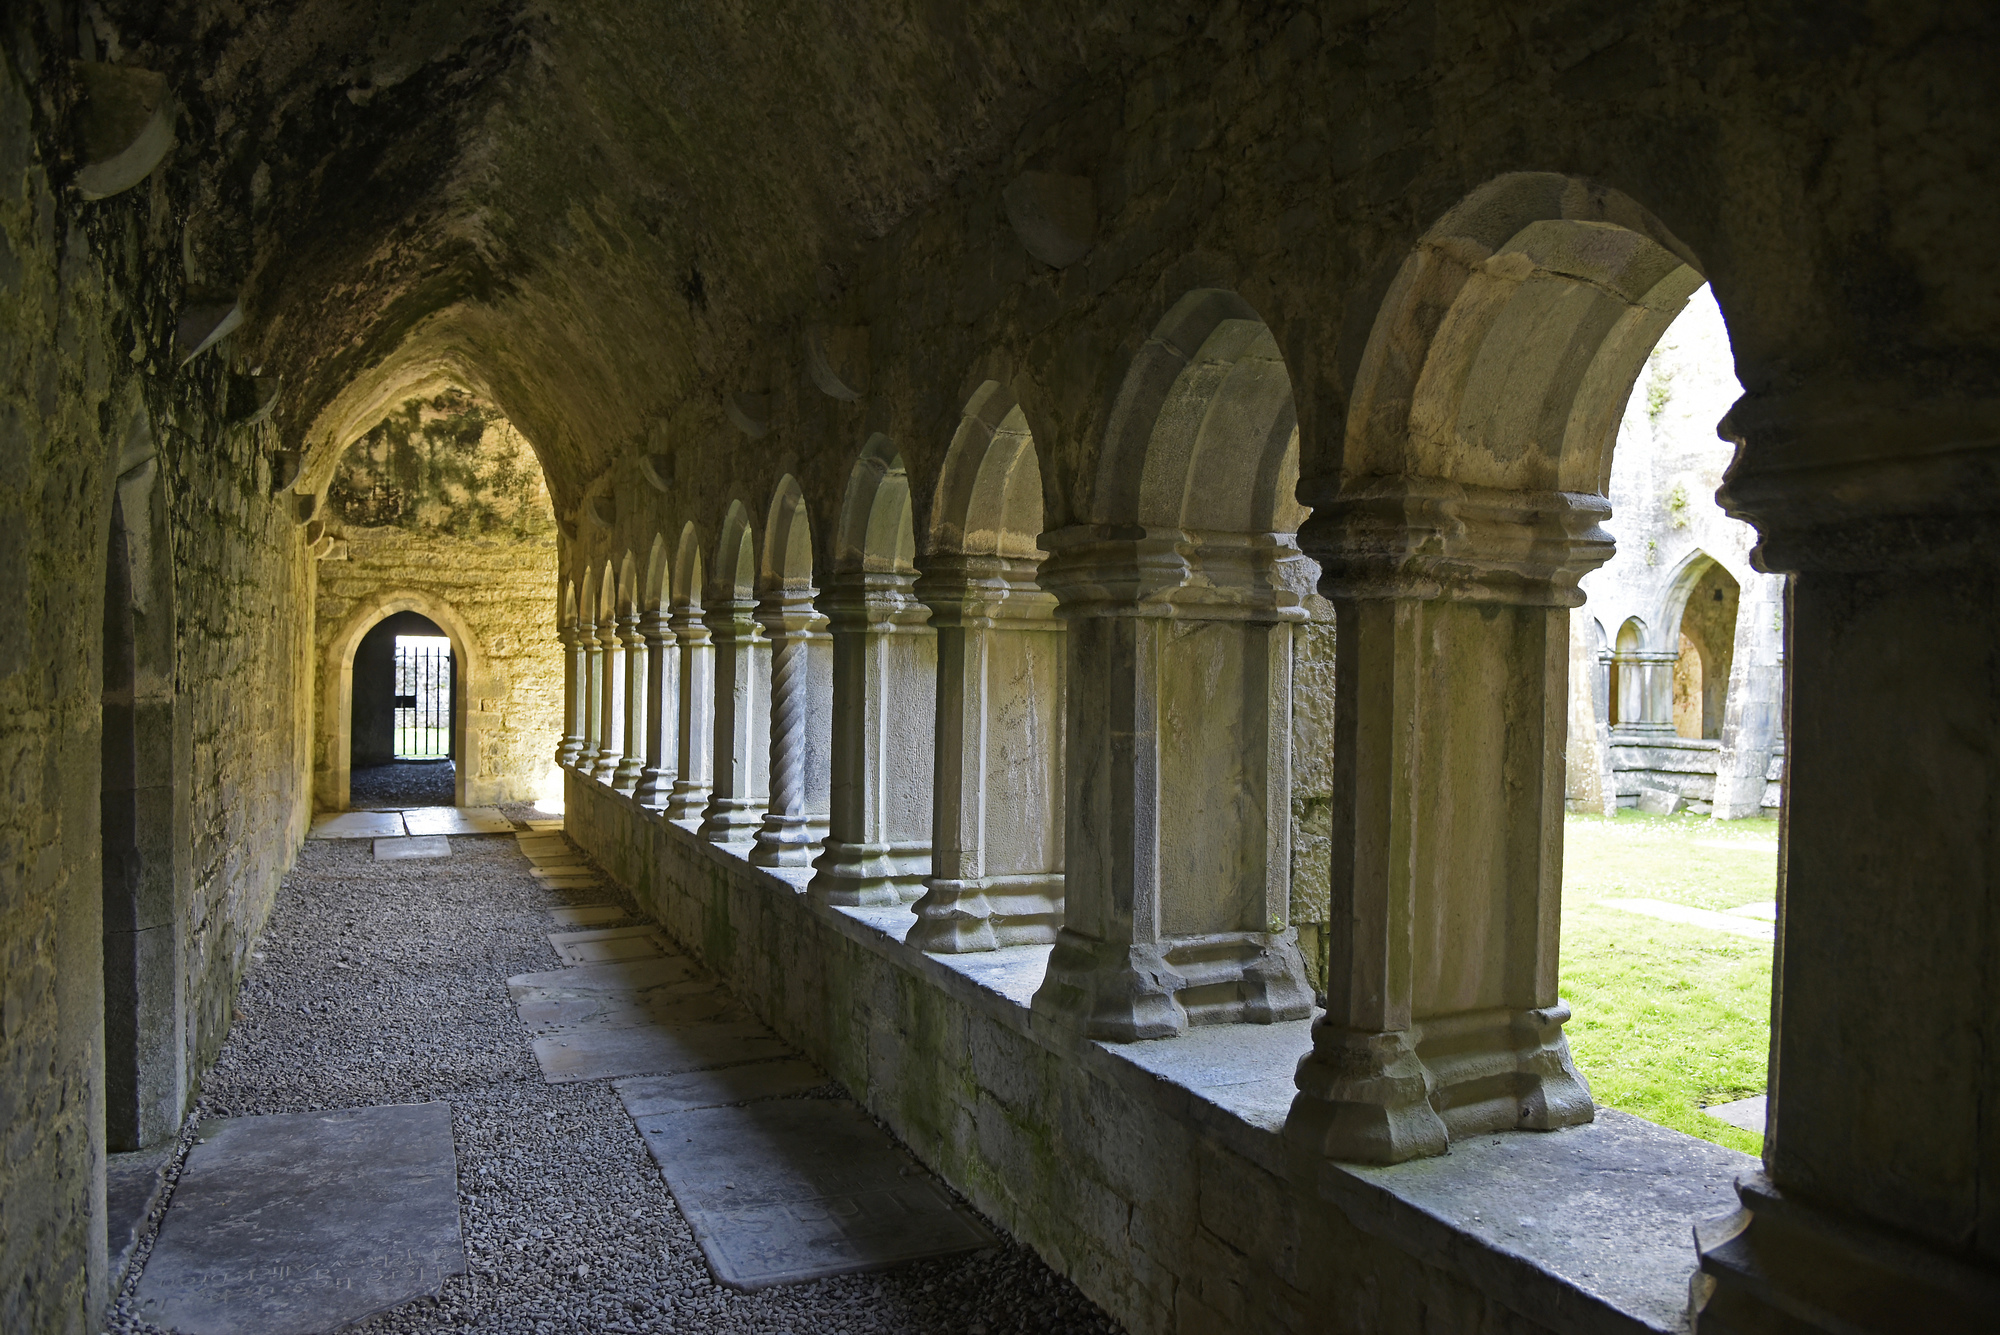 Quin - Quin Abbey; Cloister (1) | The West | Pictures | Ireland in ...